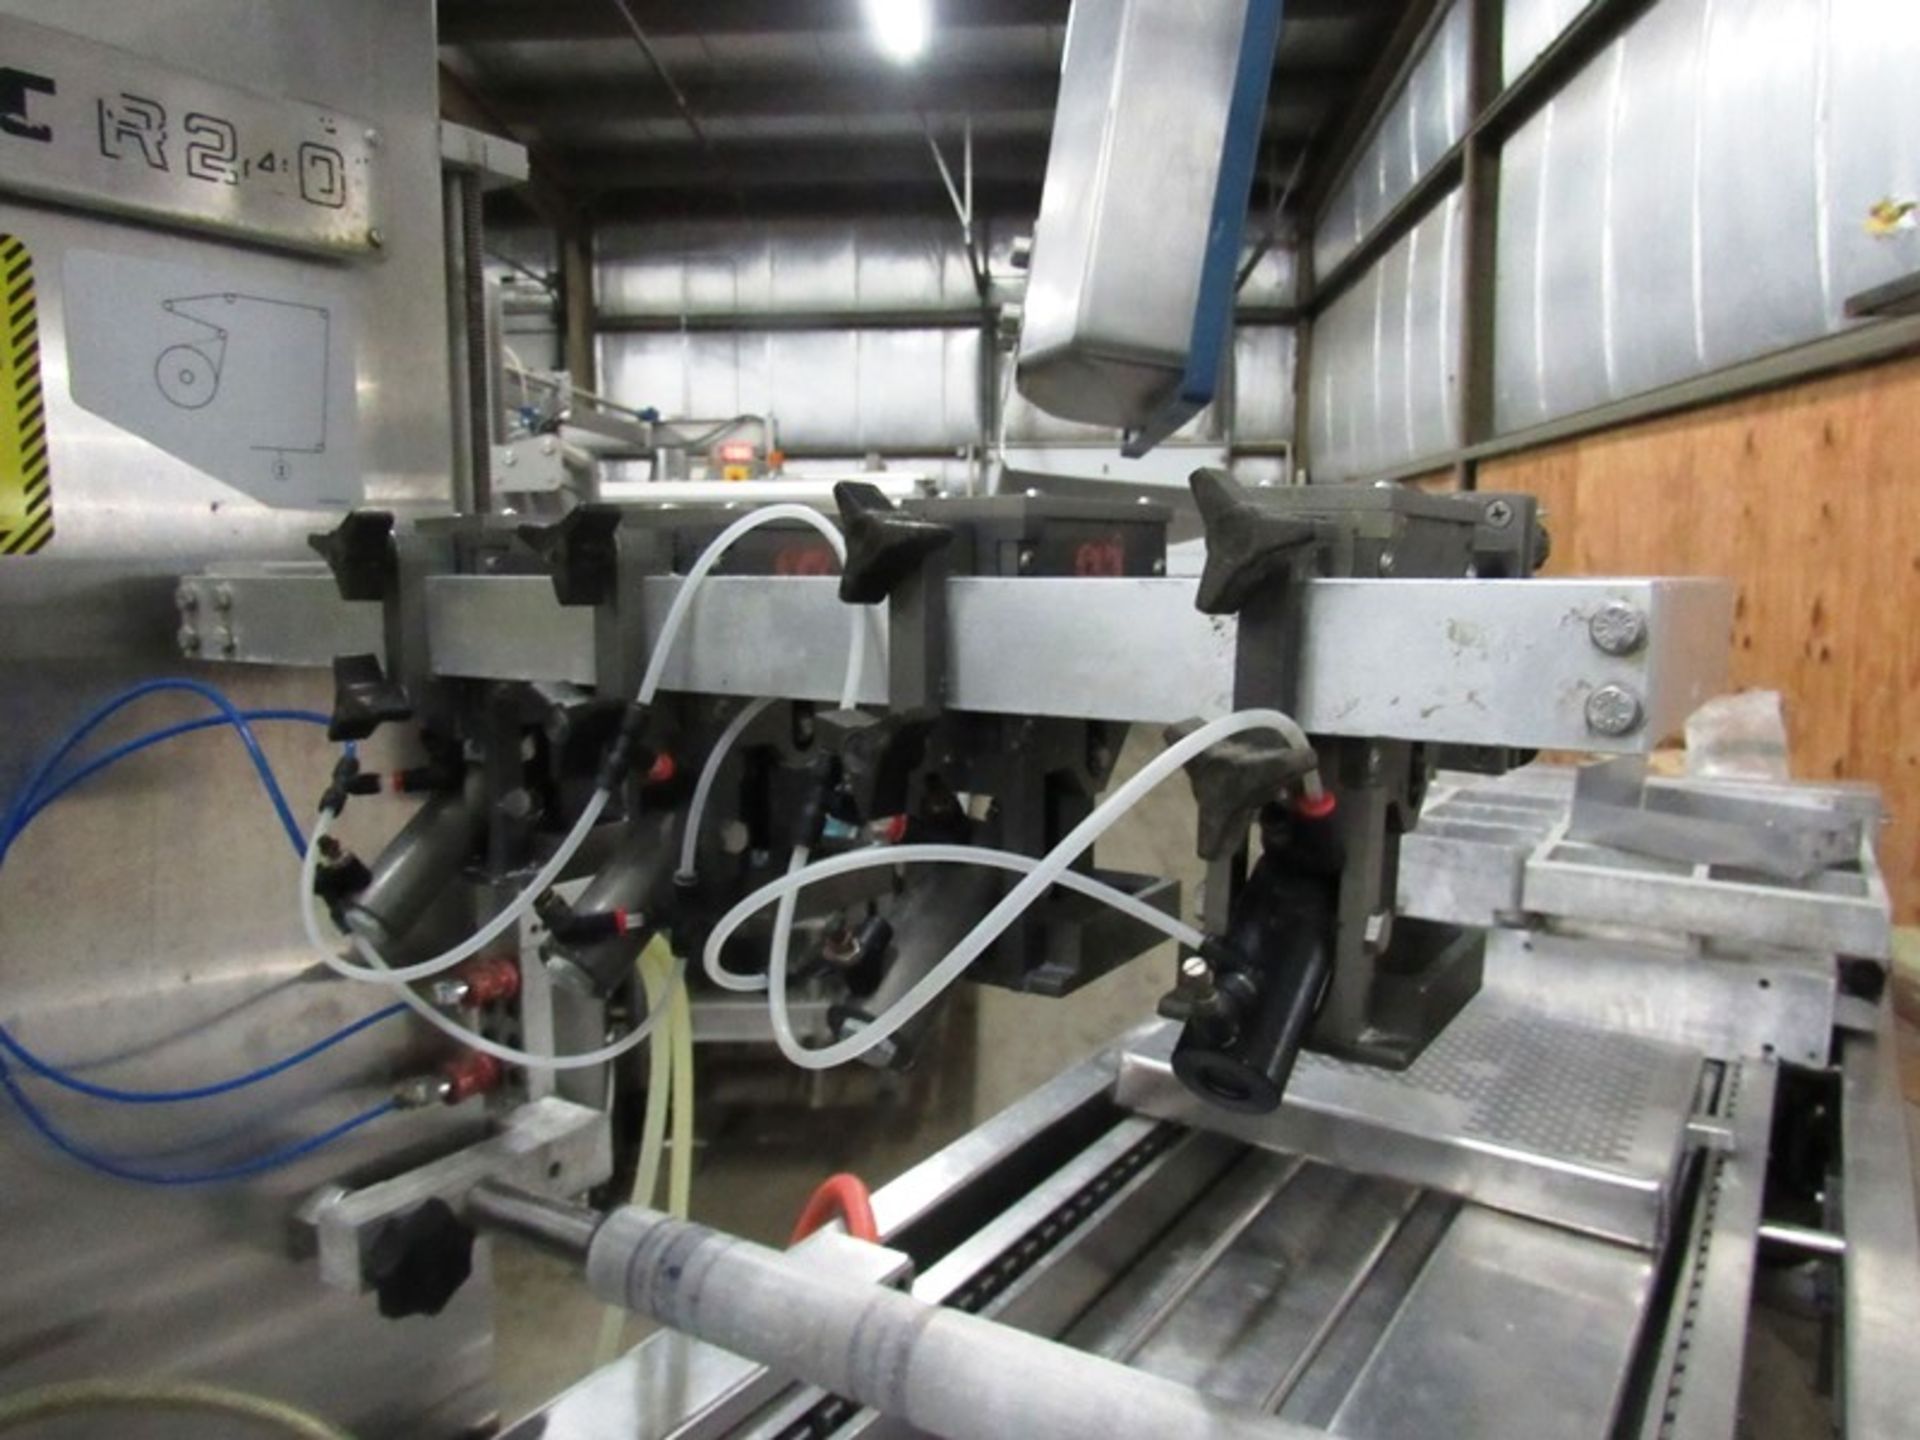 Multivac Mdl. R240 Rollstock Thermoforming Packager, Ser. #106852, approx. 450 mm between chains, - Image 11 of 31